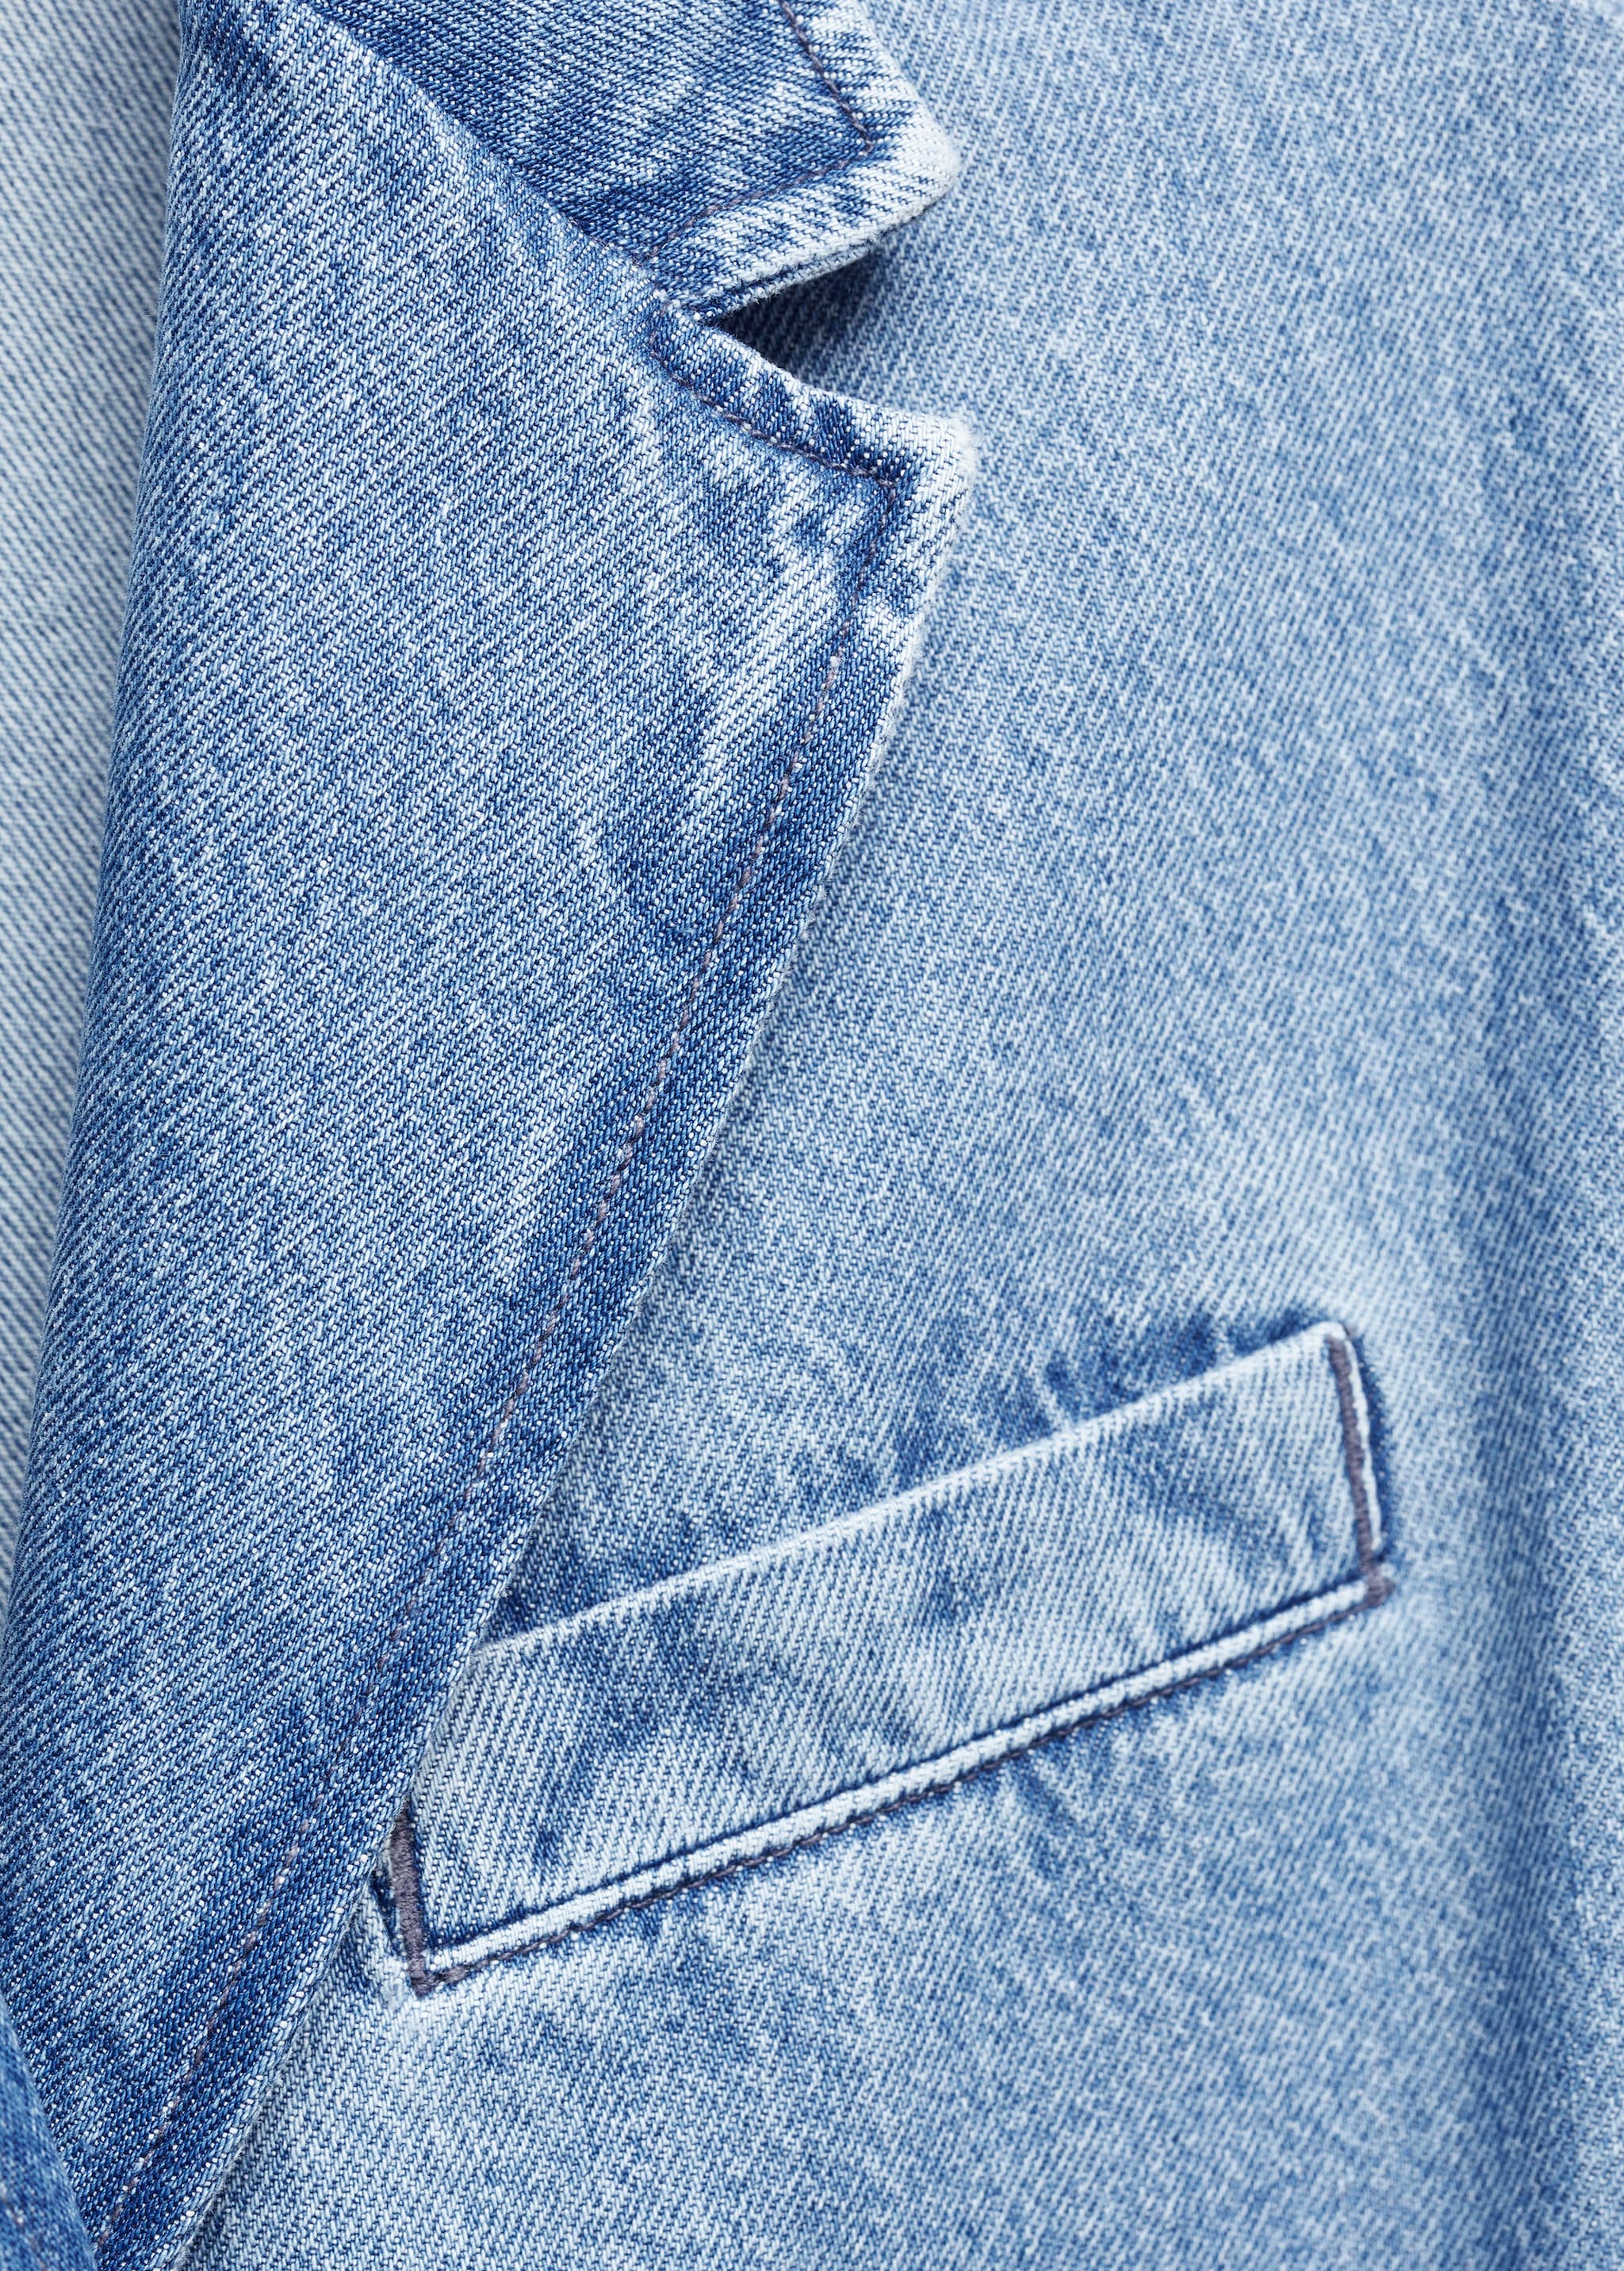 Denim jacket with buttons - Details of the article 8